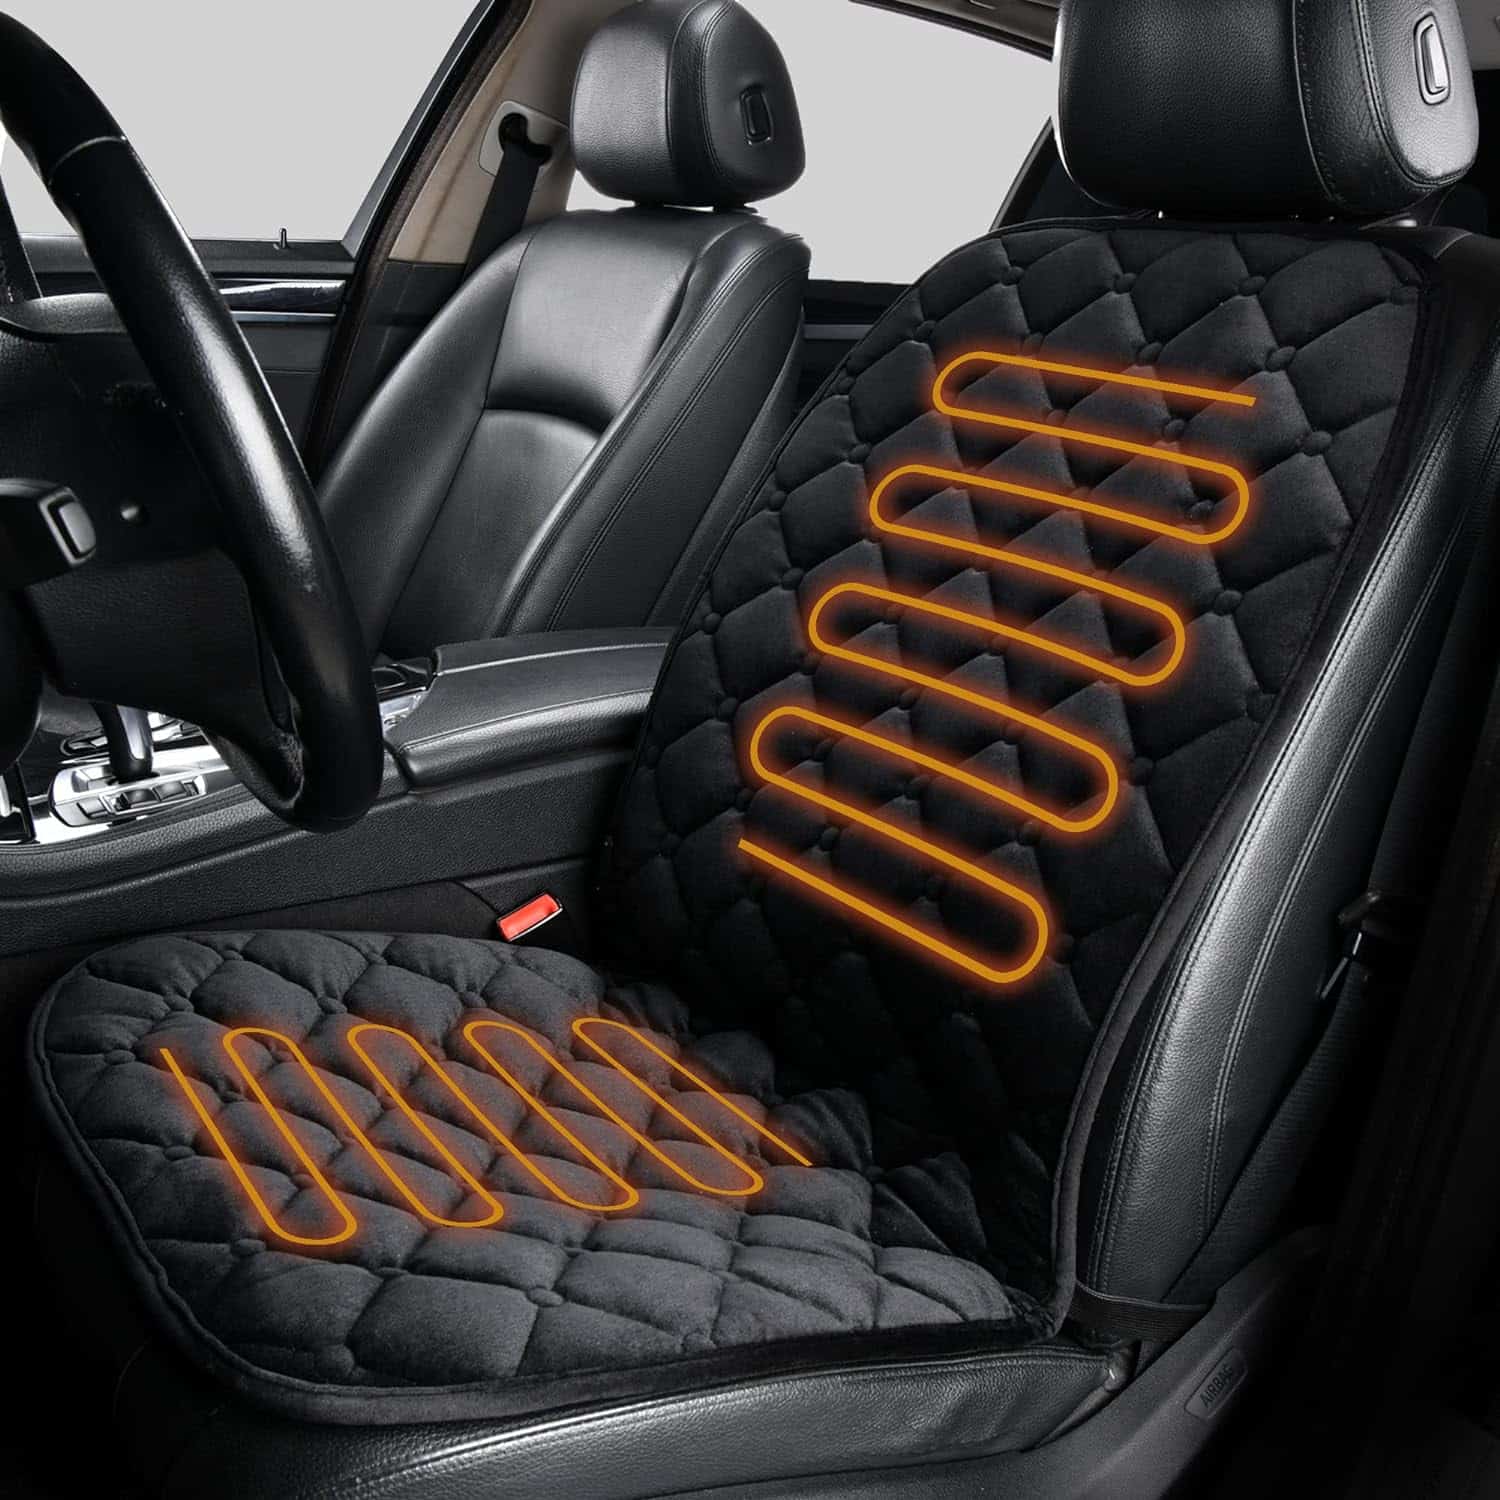 Heated car seat cover